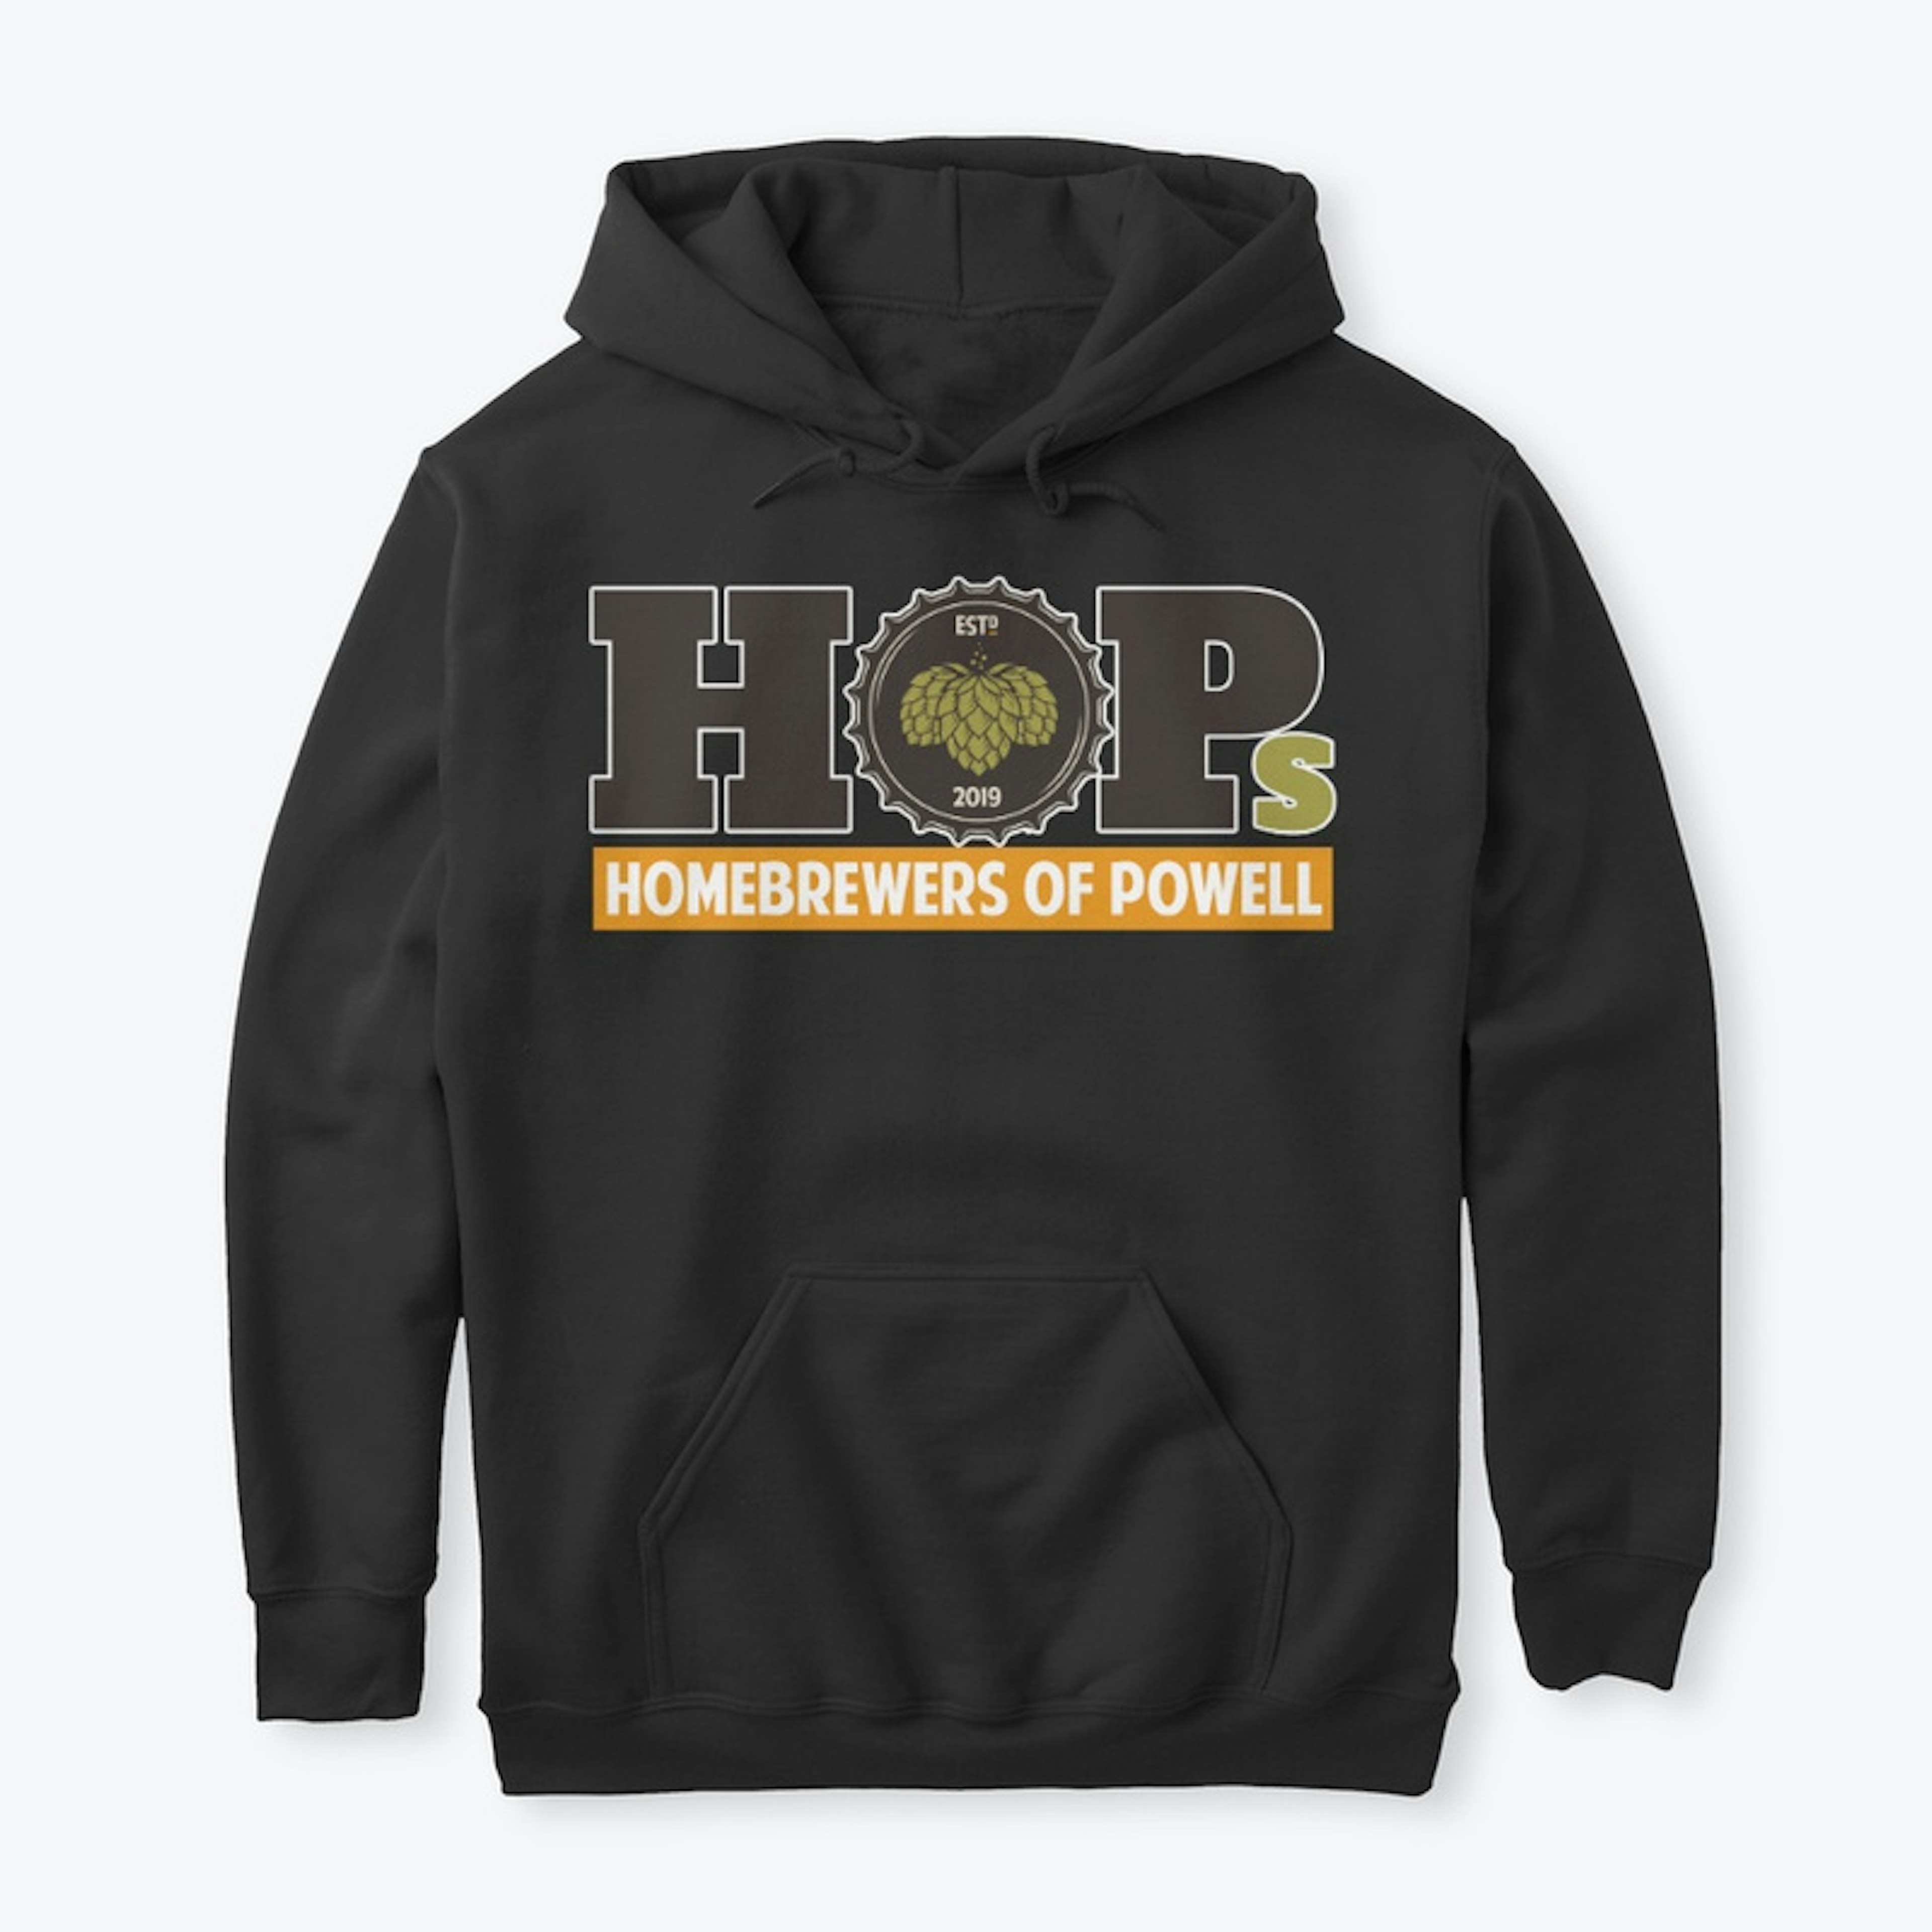 Homebrewers of Powell